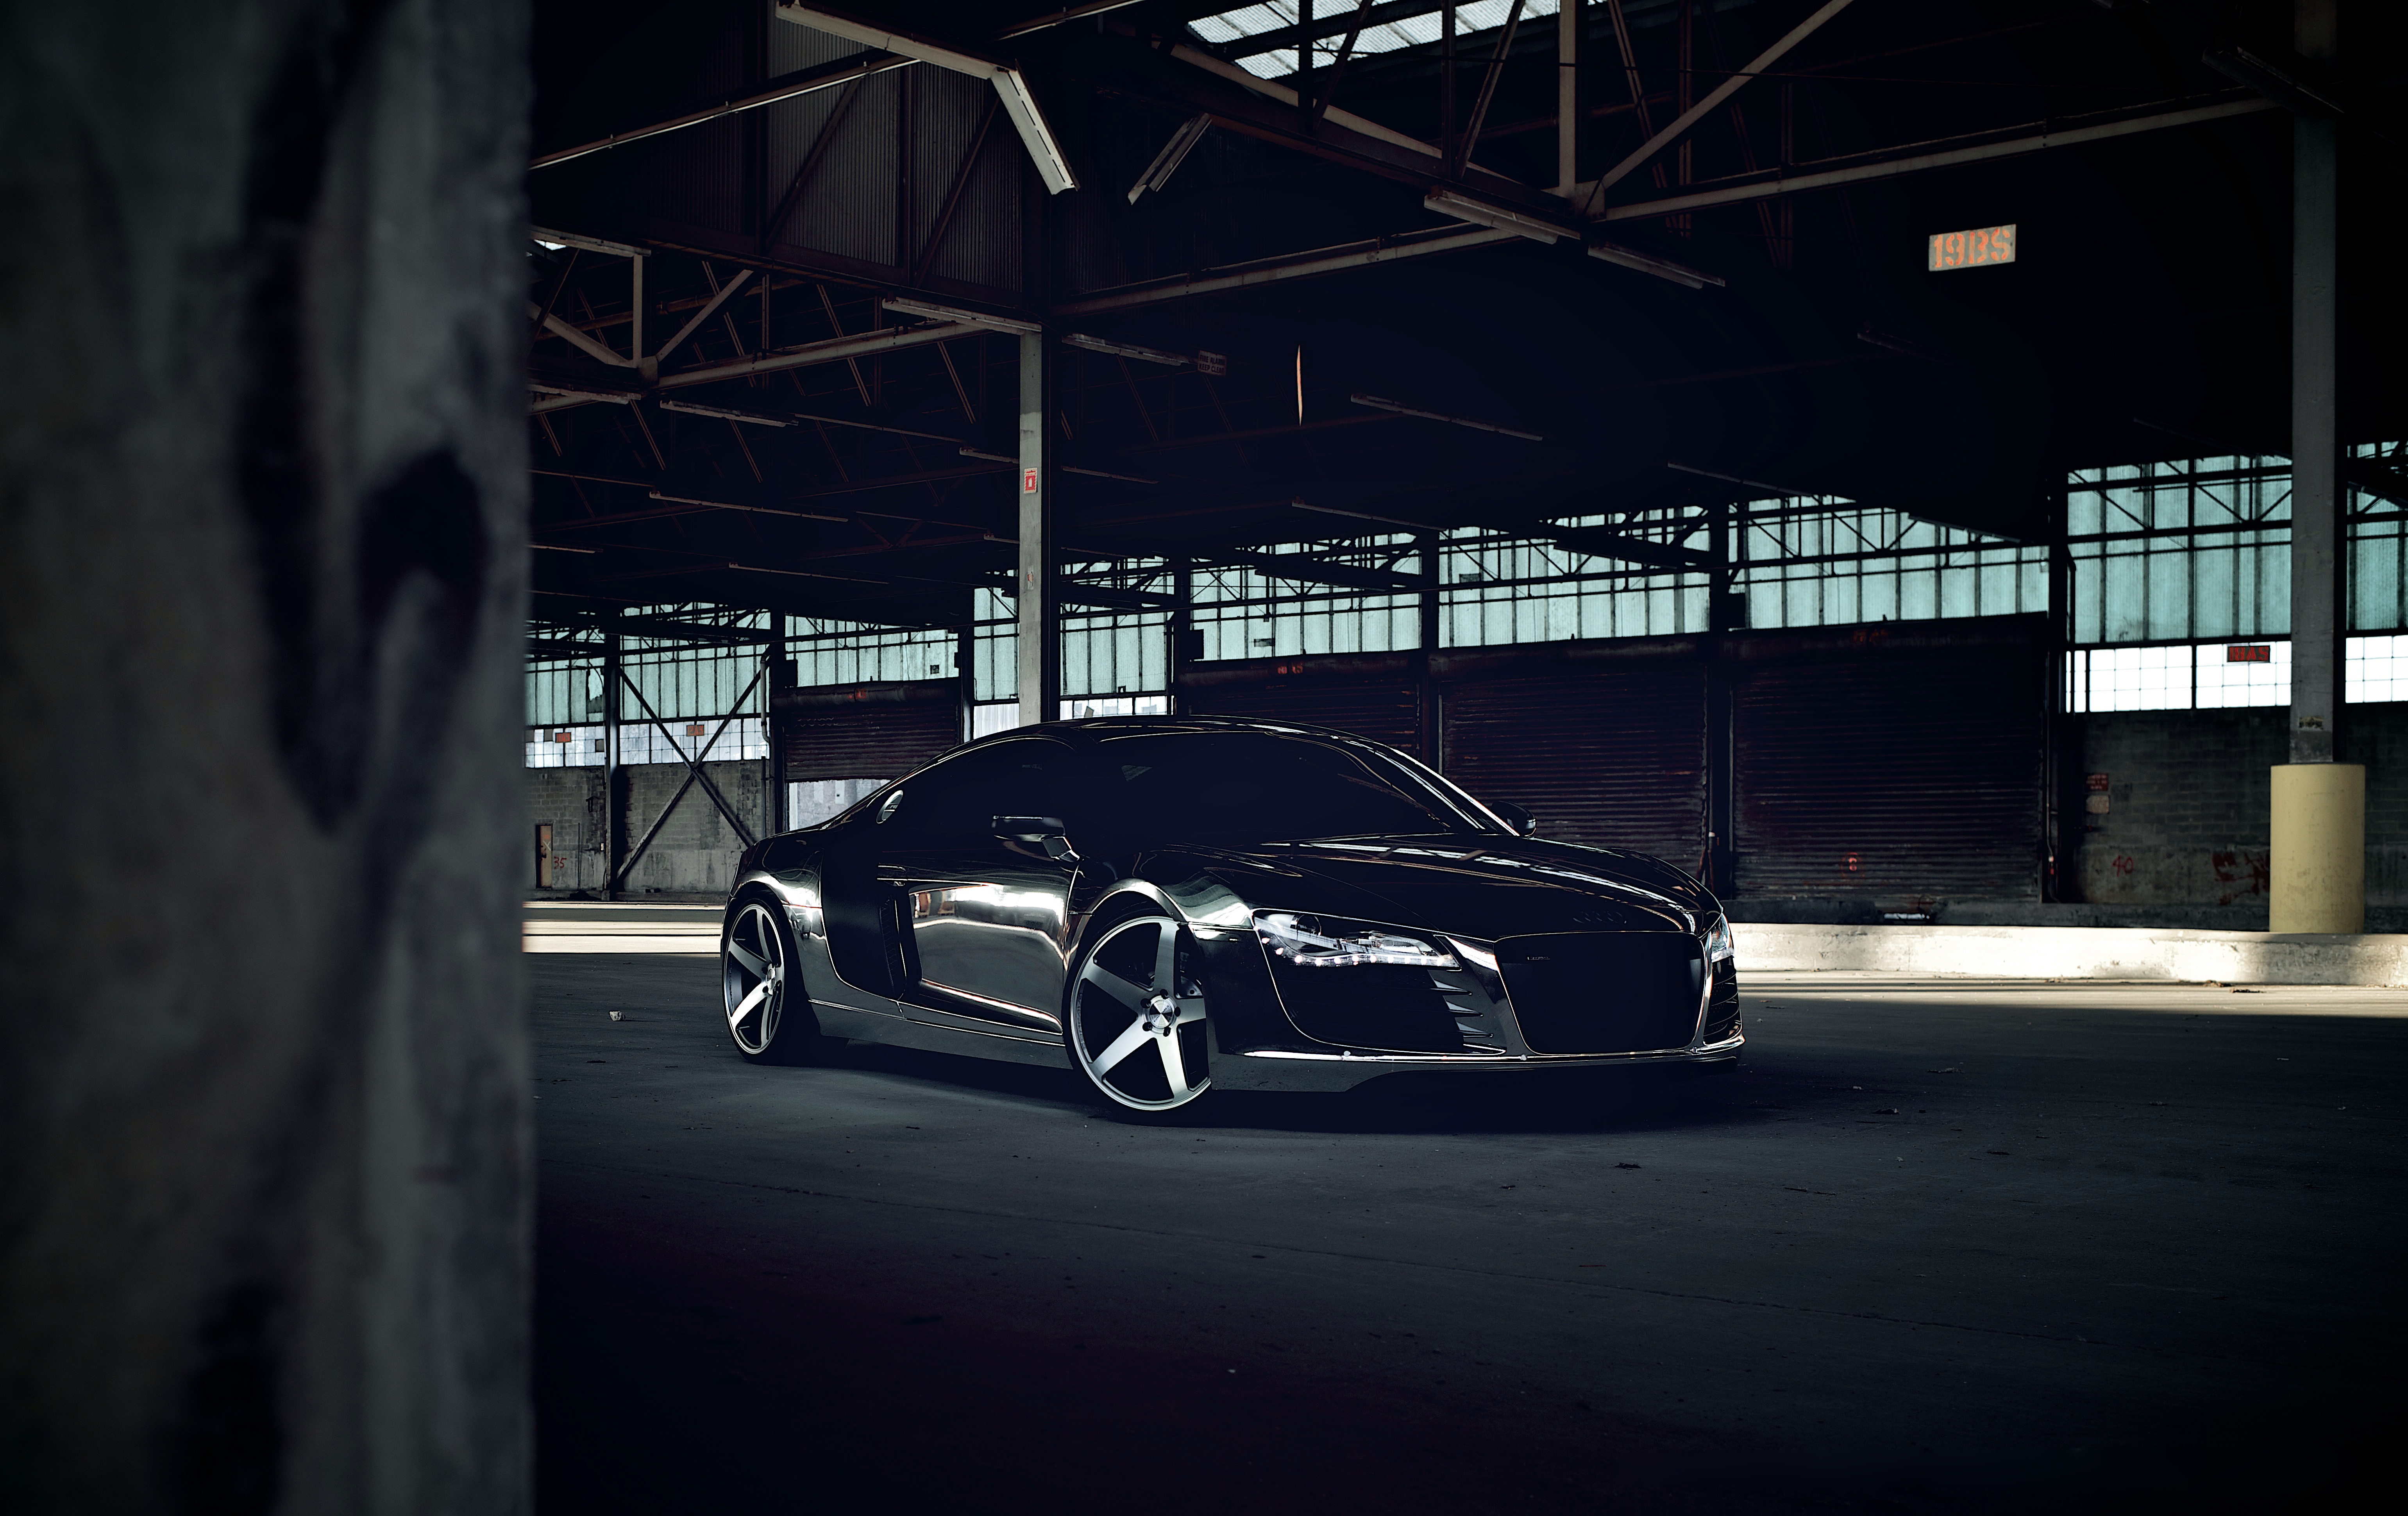 83592 download wallpaper audi, cars, black, r8, chrome, cw-5, matte black screensavers and pictures for free